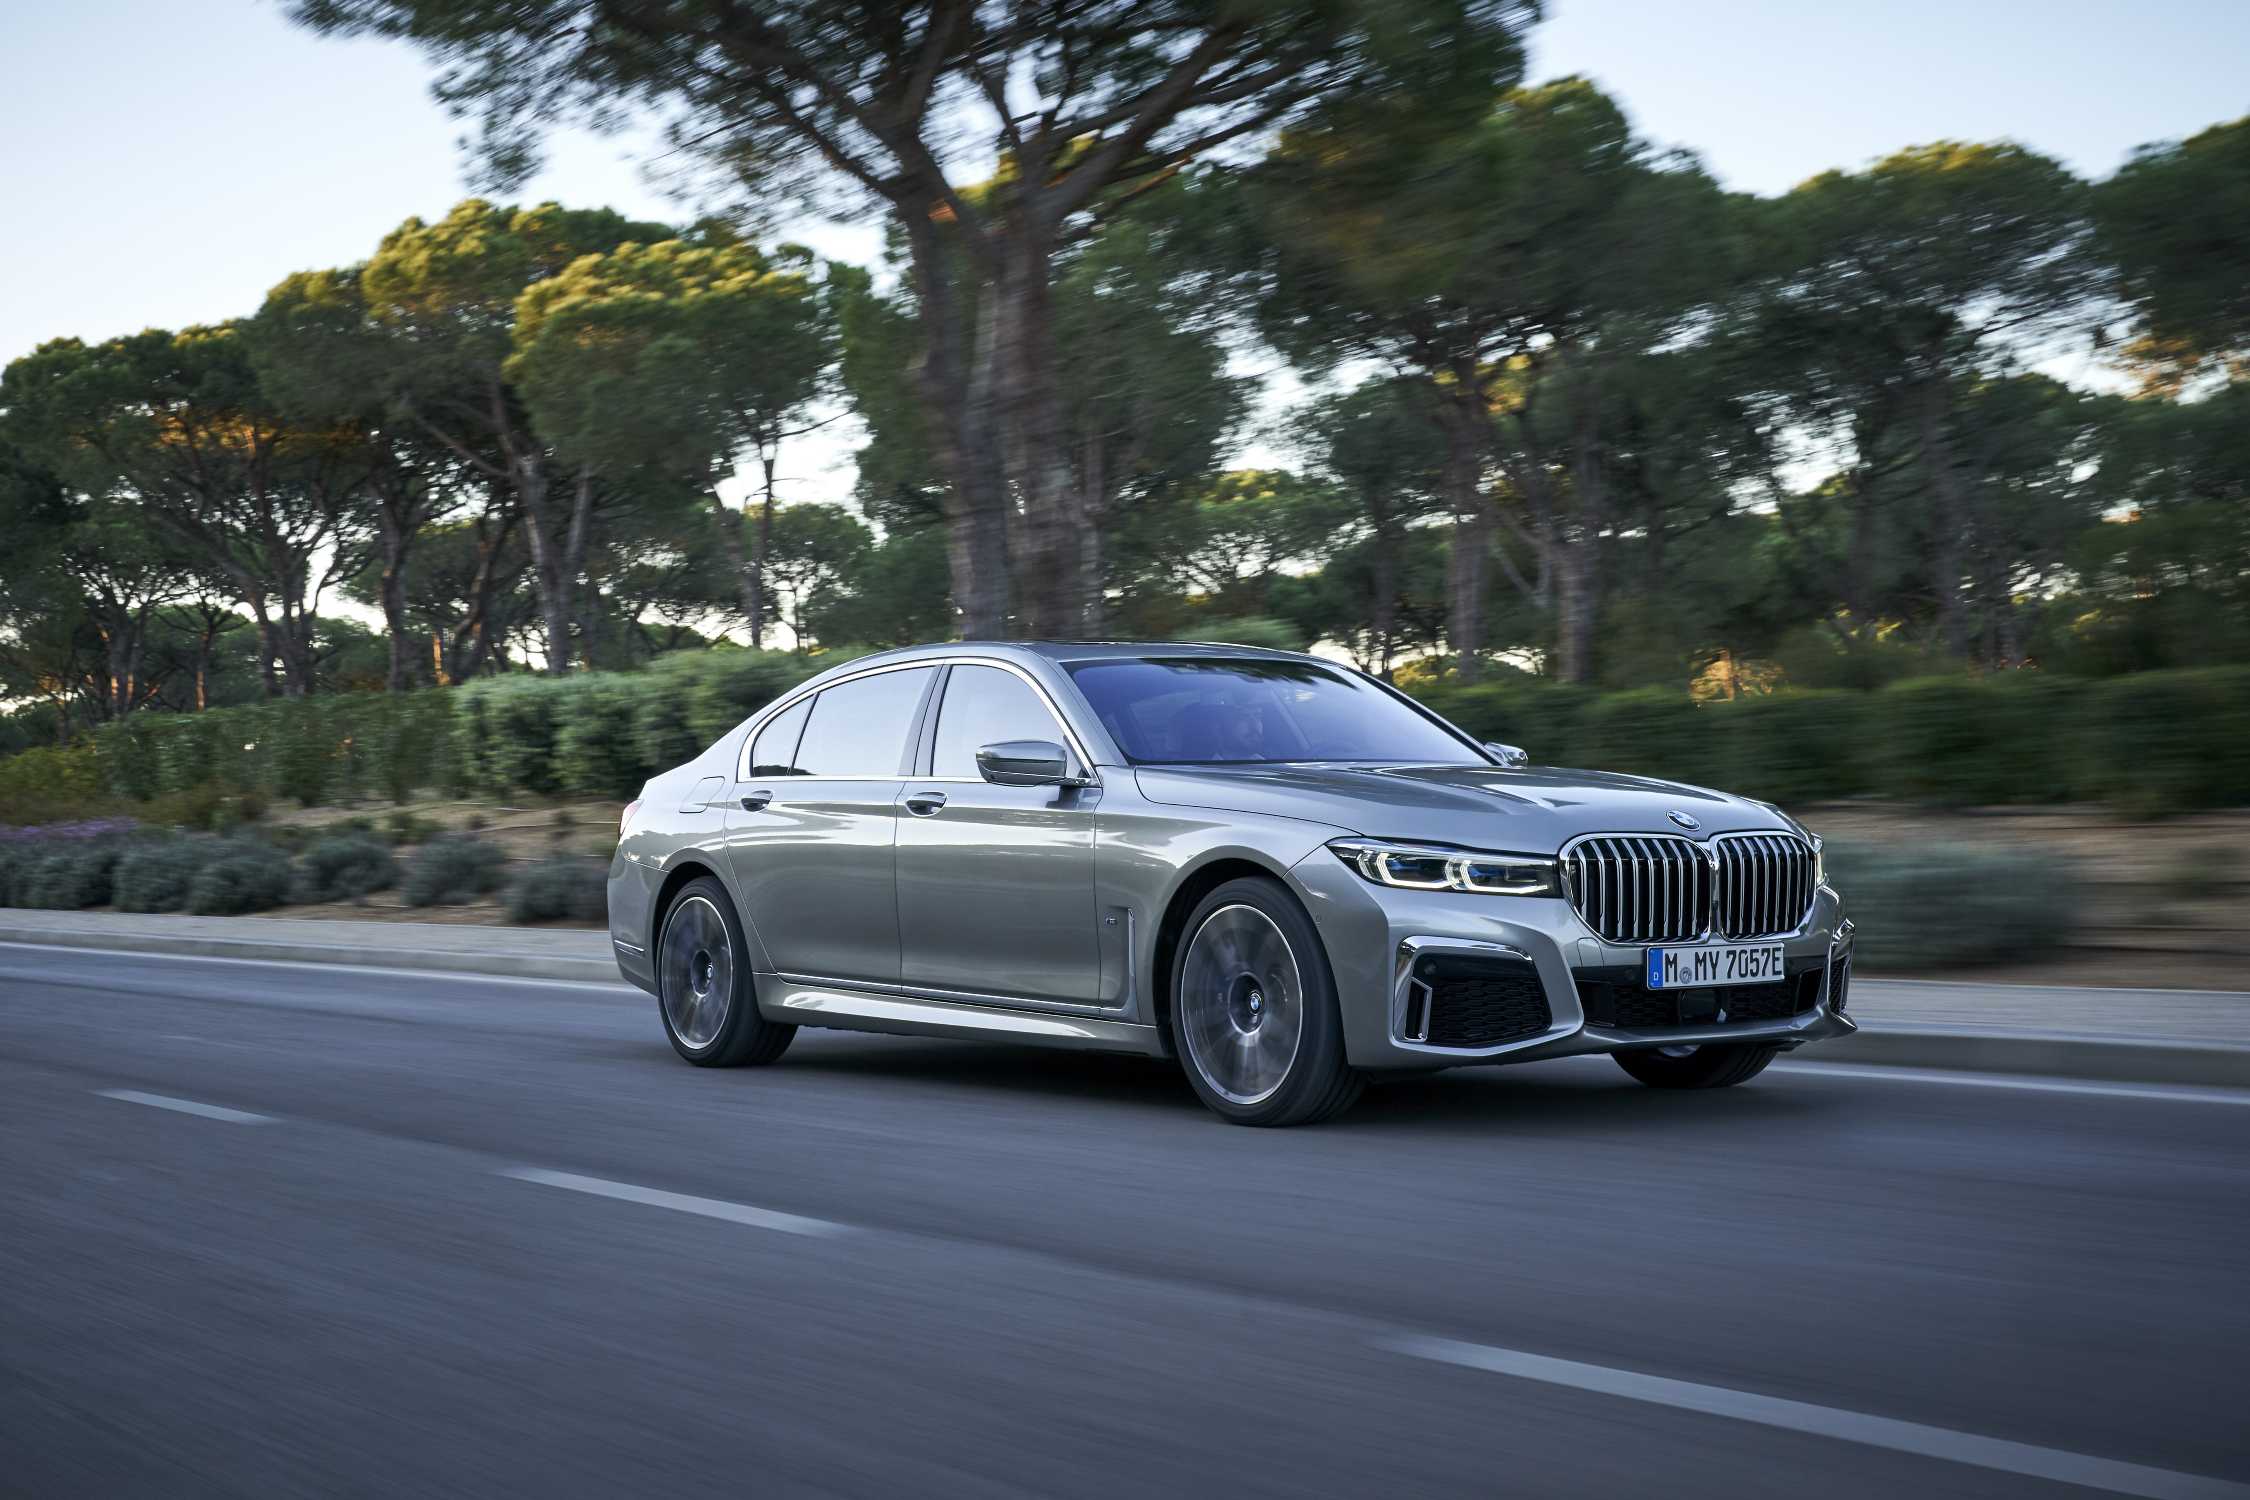 The new BMW 745Le xDrive in colour Donington Grey and 20” M light alloy wheels Star-spoke style 817 M Bicolour – Faro, Portugal (04/2019).